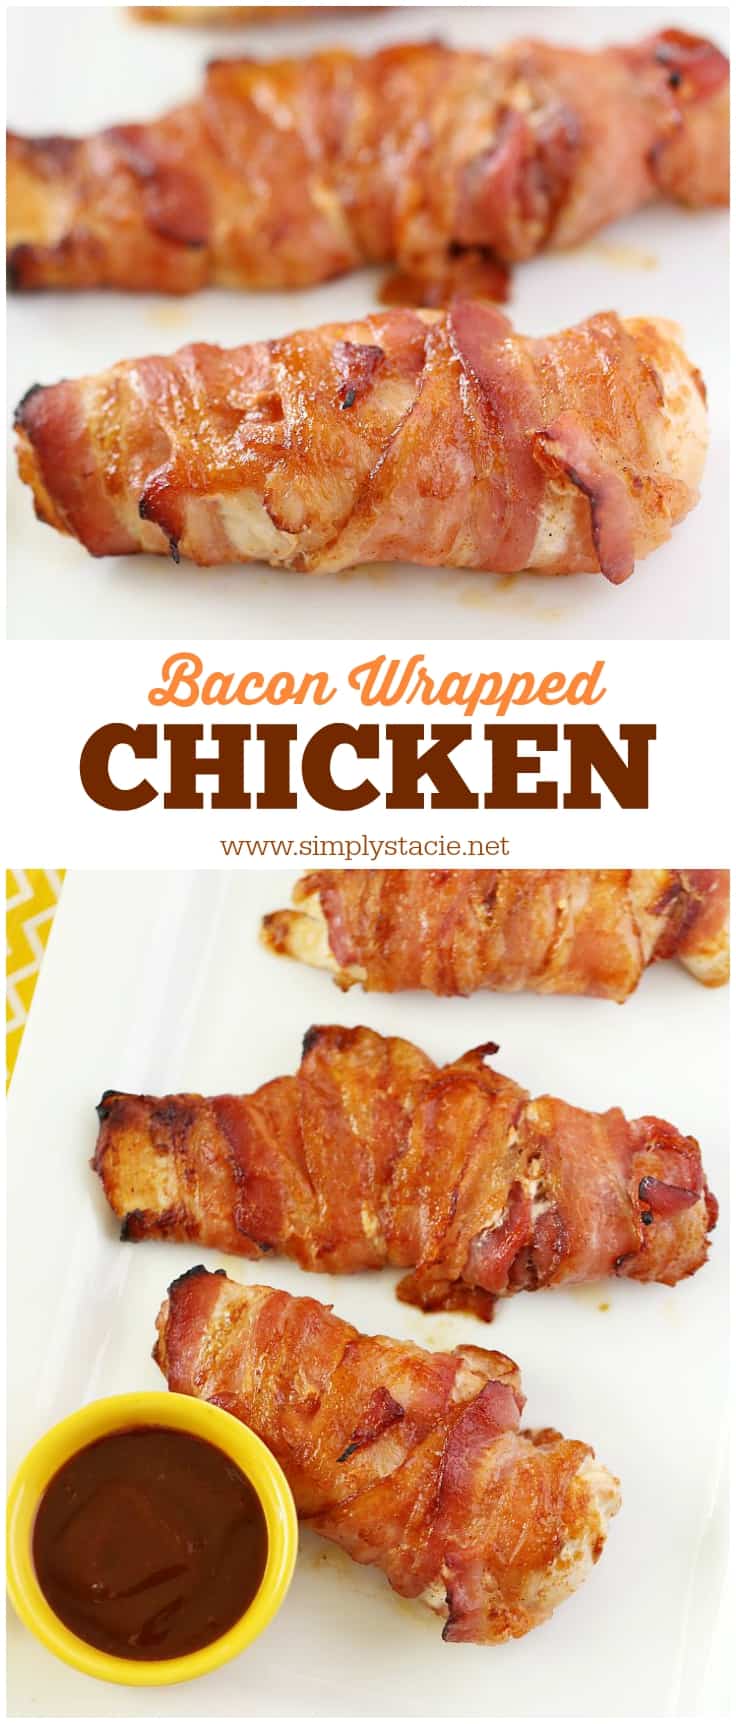 Bacon Wrapped Chicken - Only 4 ingredients! Juicy chicken breasts wrapped in crispy bacon and slathered with barbecue sauce and a little paprika.